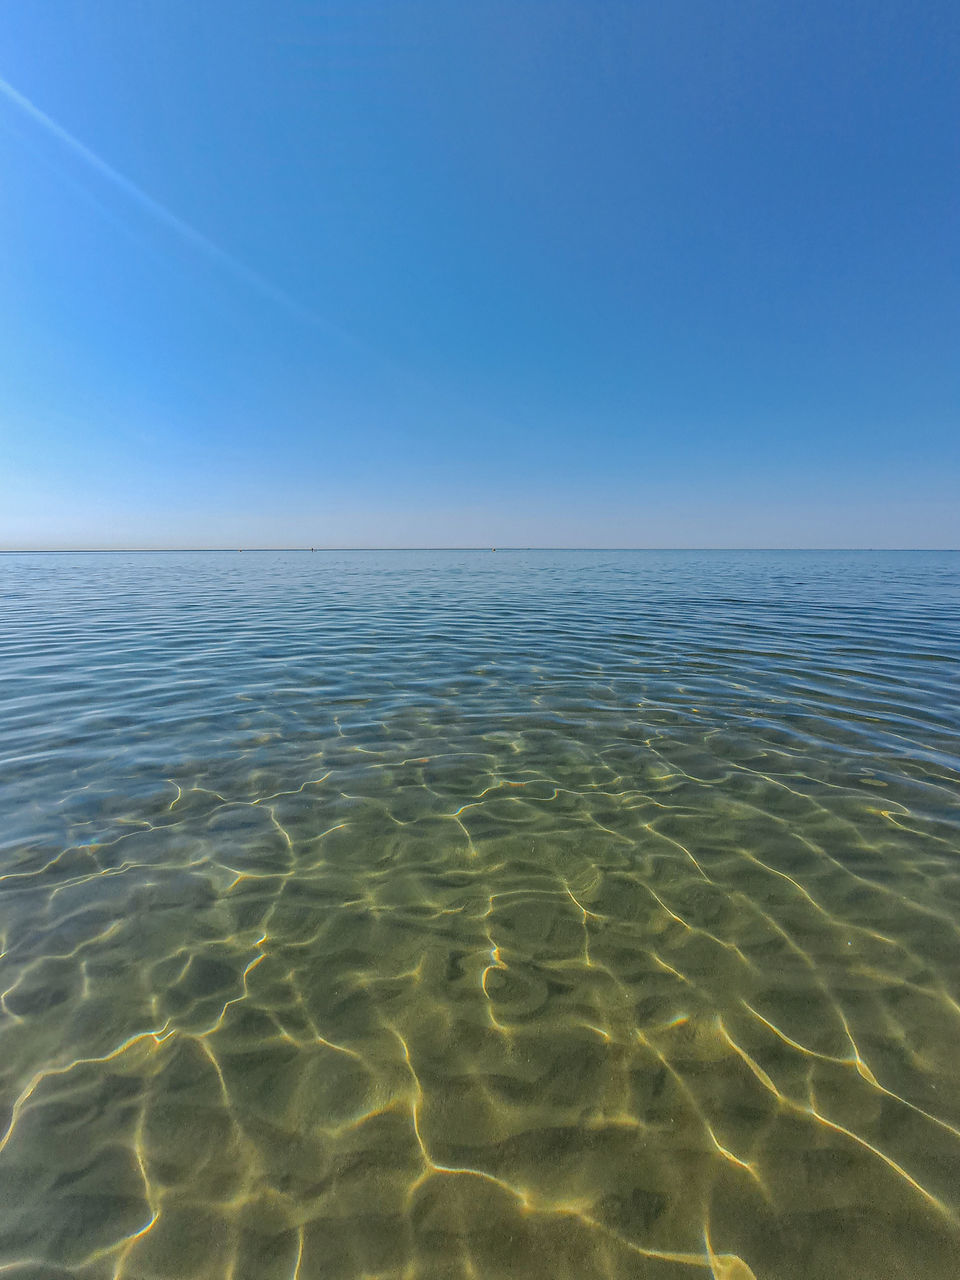 horizon, sky, water, sea, blue, ocean, beauty in nature, scenics - nature, nature, tranquility, clear sky, natural environment, land, horizon over water, tranquil scene, no people, day, shore, idyllic, rippled, copy space, outdoors, sand, coast, sunlight, pattern, wave, environment, beach, landscape, wave pattern, urban skyline, body of water, backgrounds, sunny